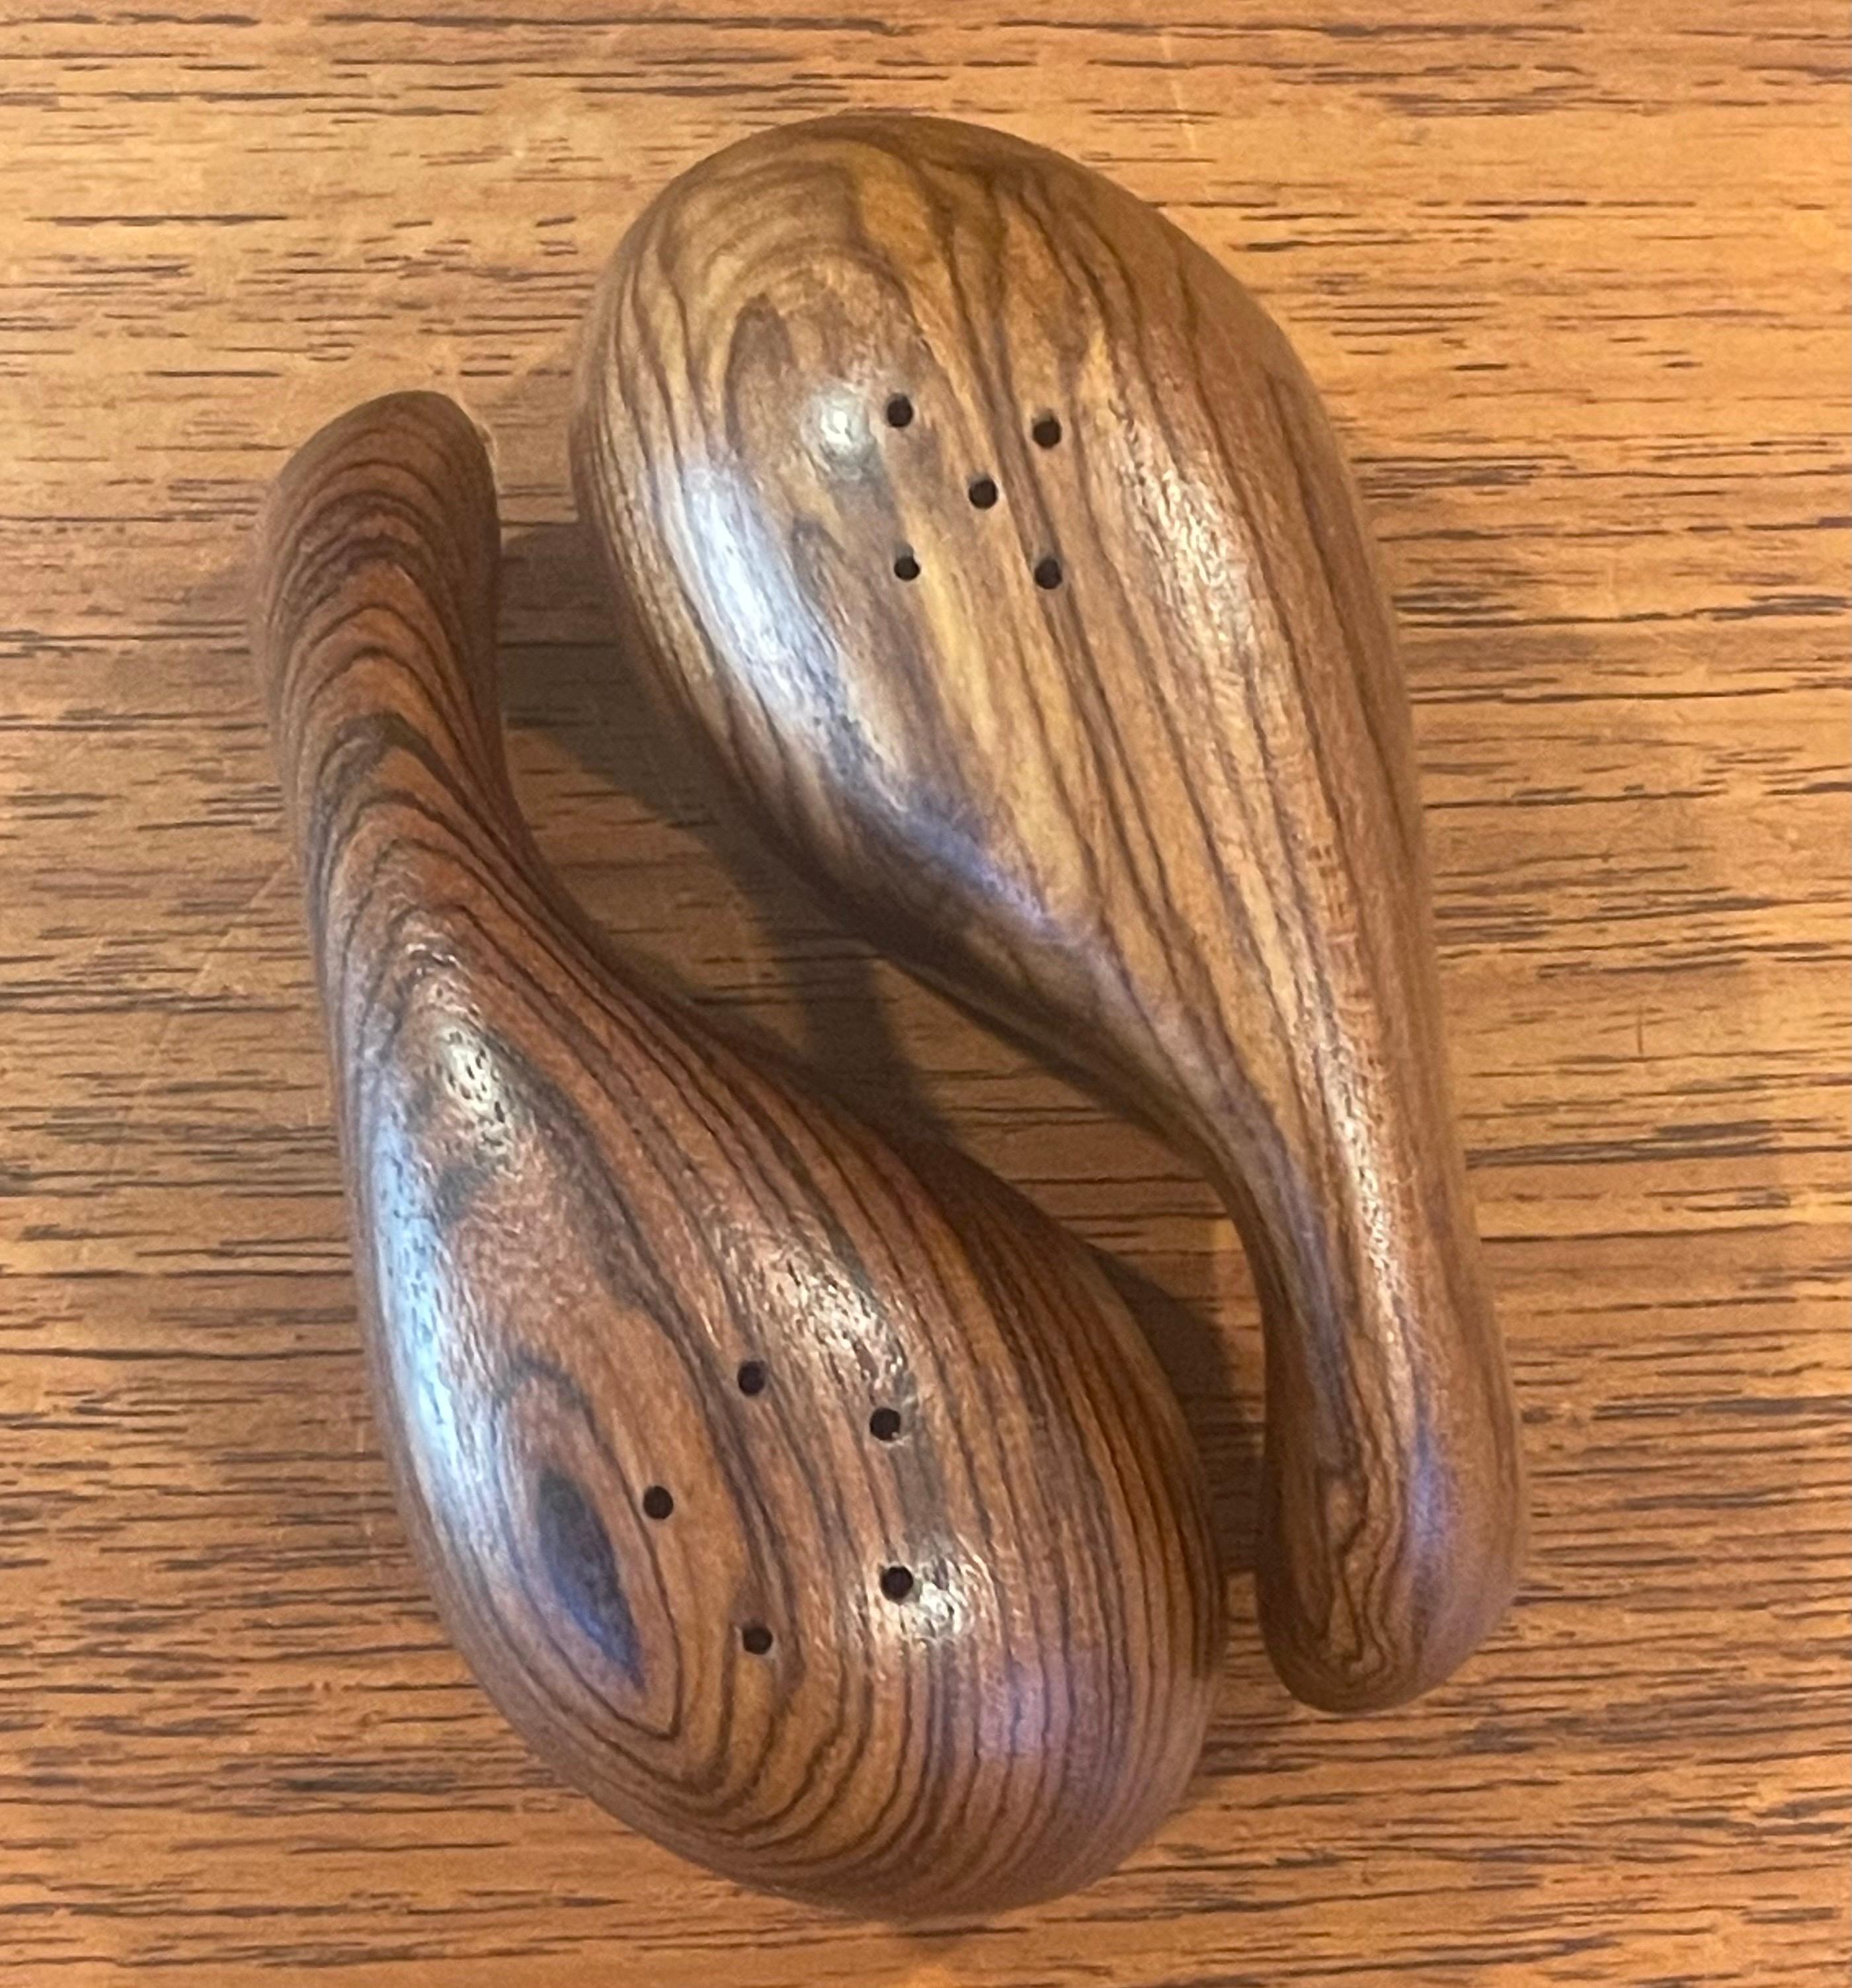 Pair of MCM Cocobolo Wood Minimalist Salt & Pepper Shakers by Don Shoemaker For Sale 3